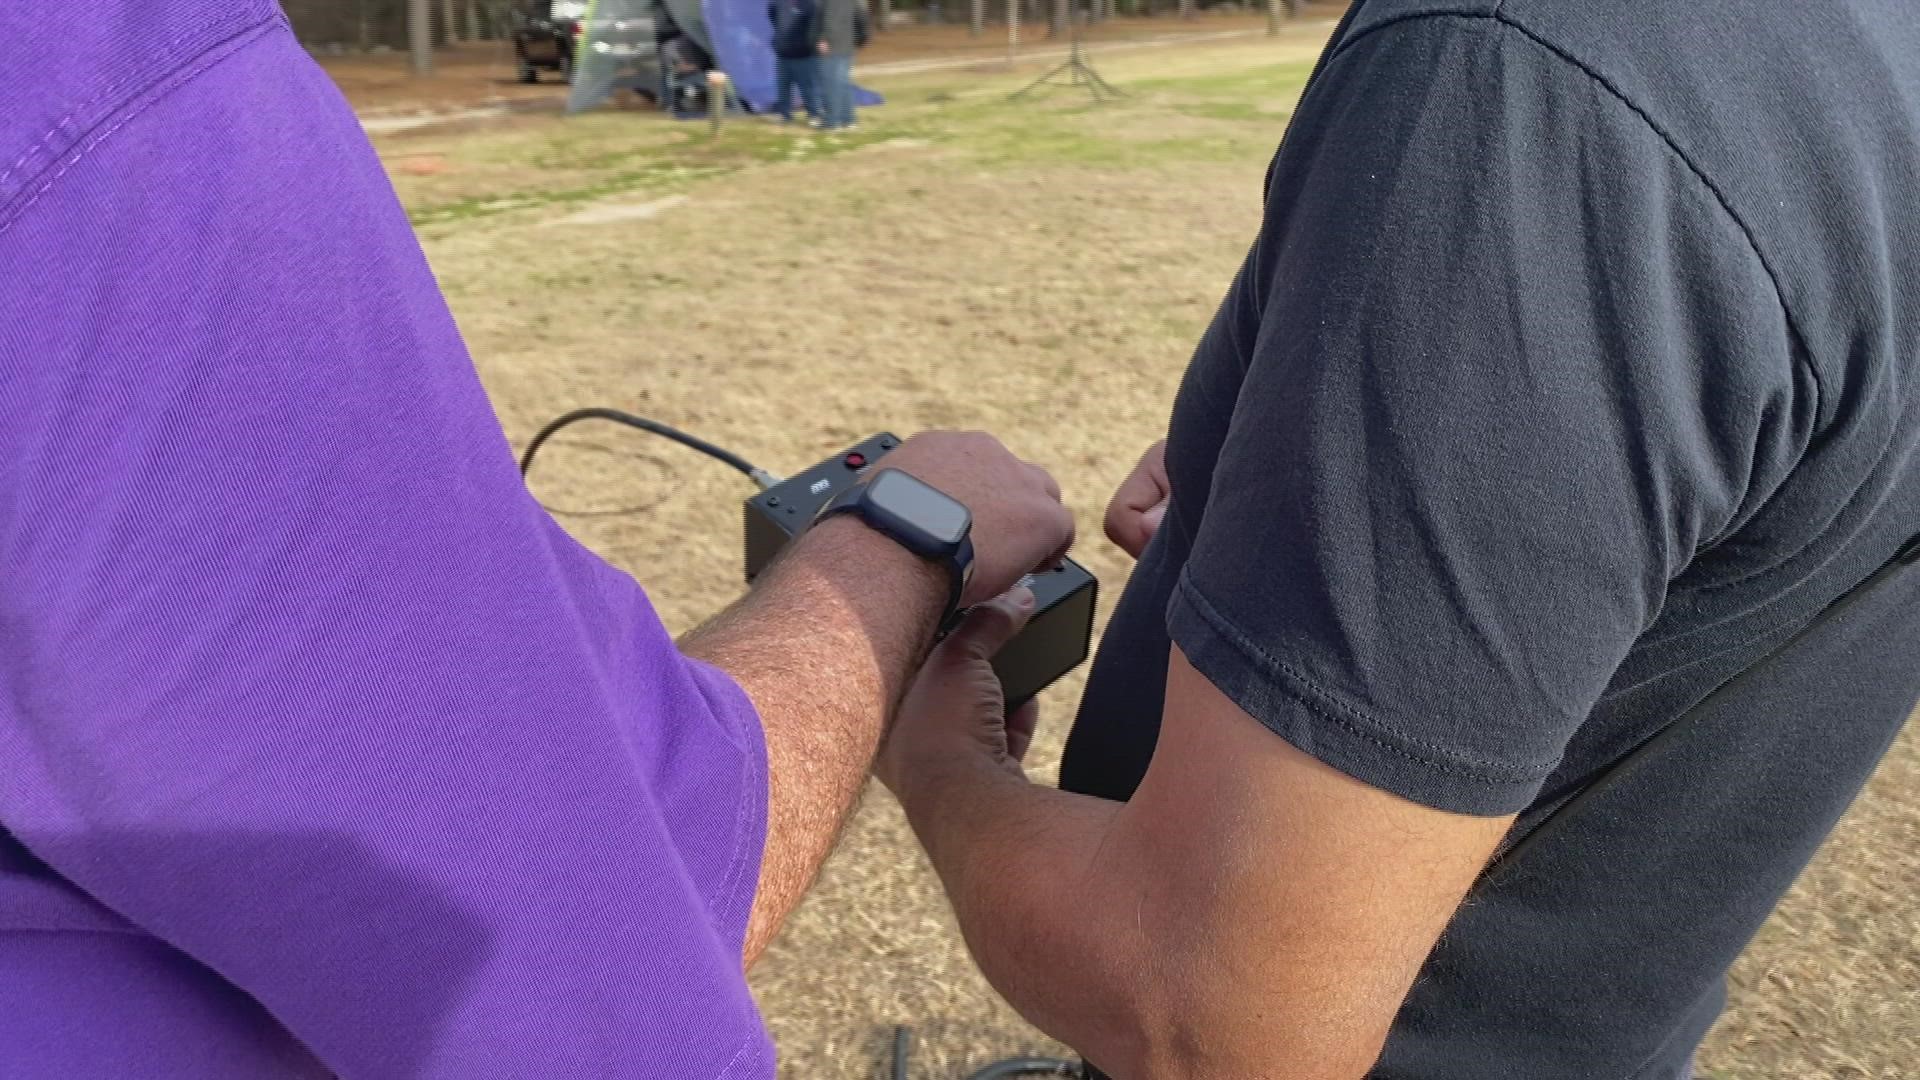 Across the country, local "hams" joined thousands of other amateur radio operators showing how ham radios work in emergency situations.